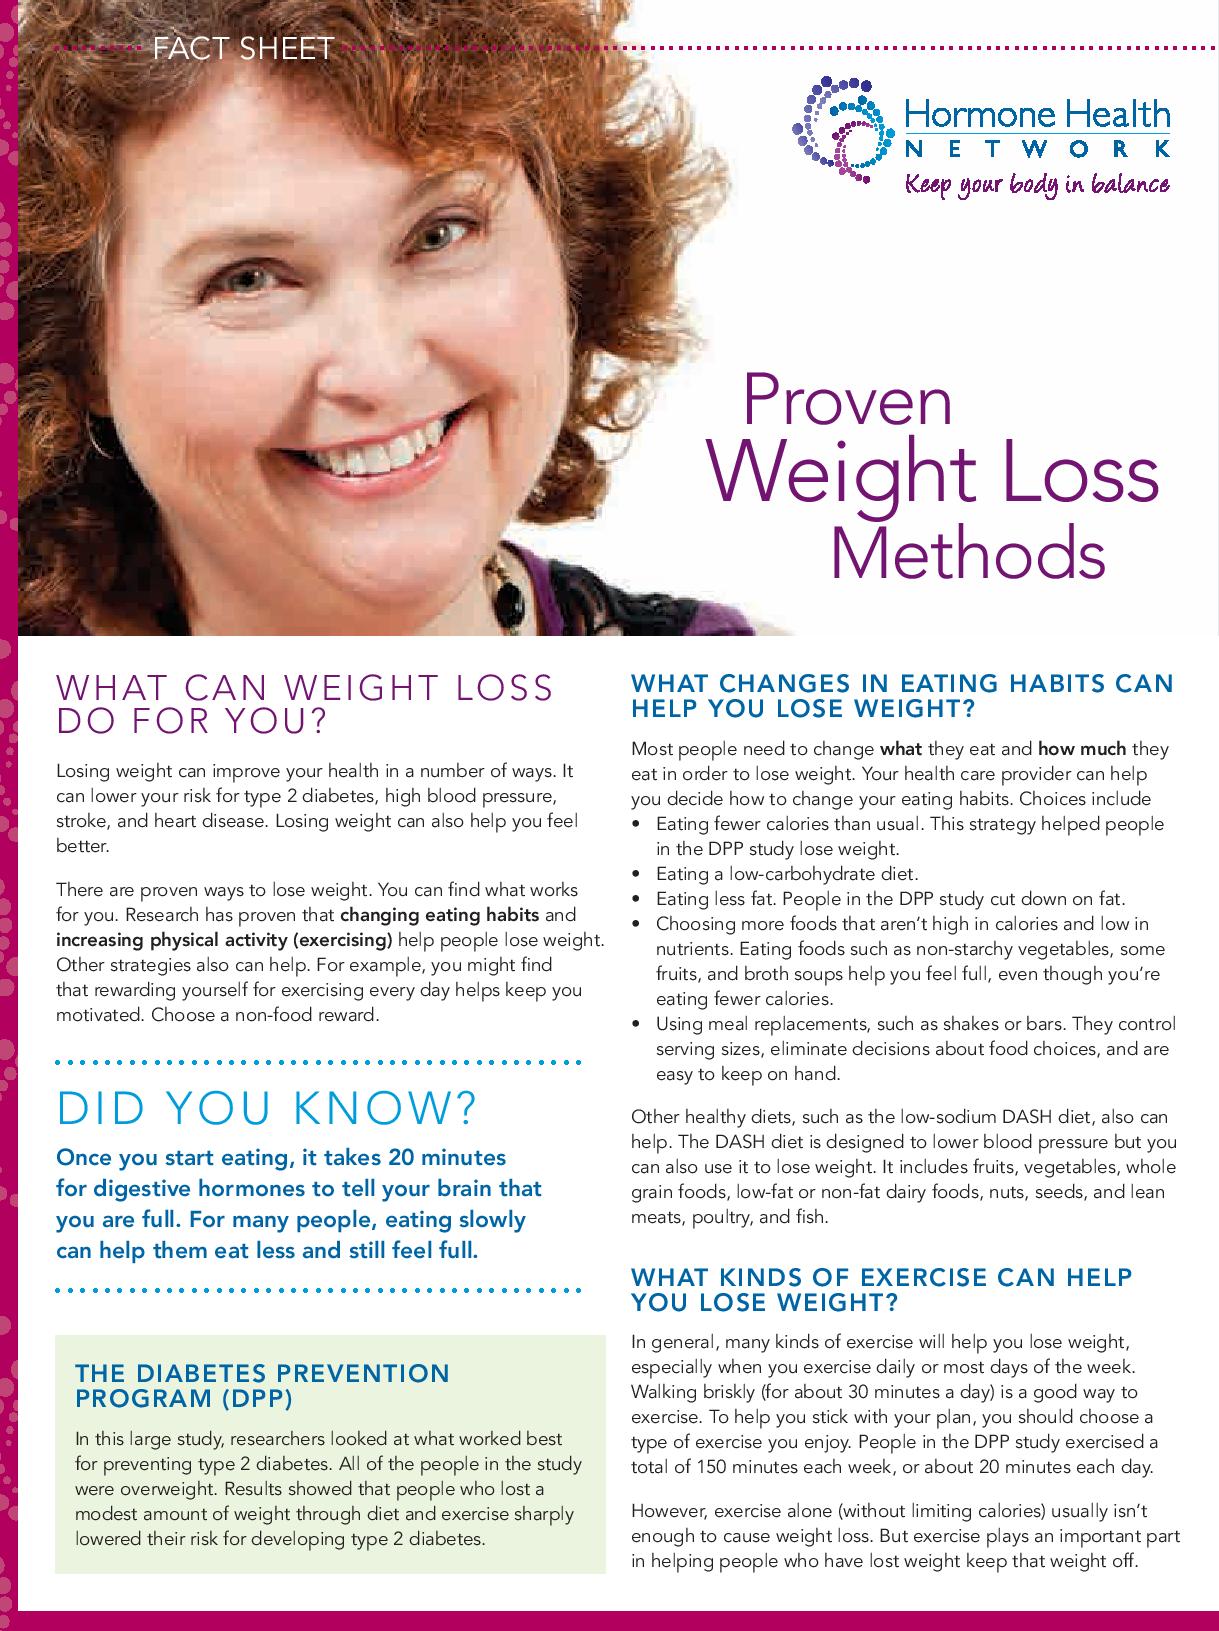 Proven weight loss